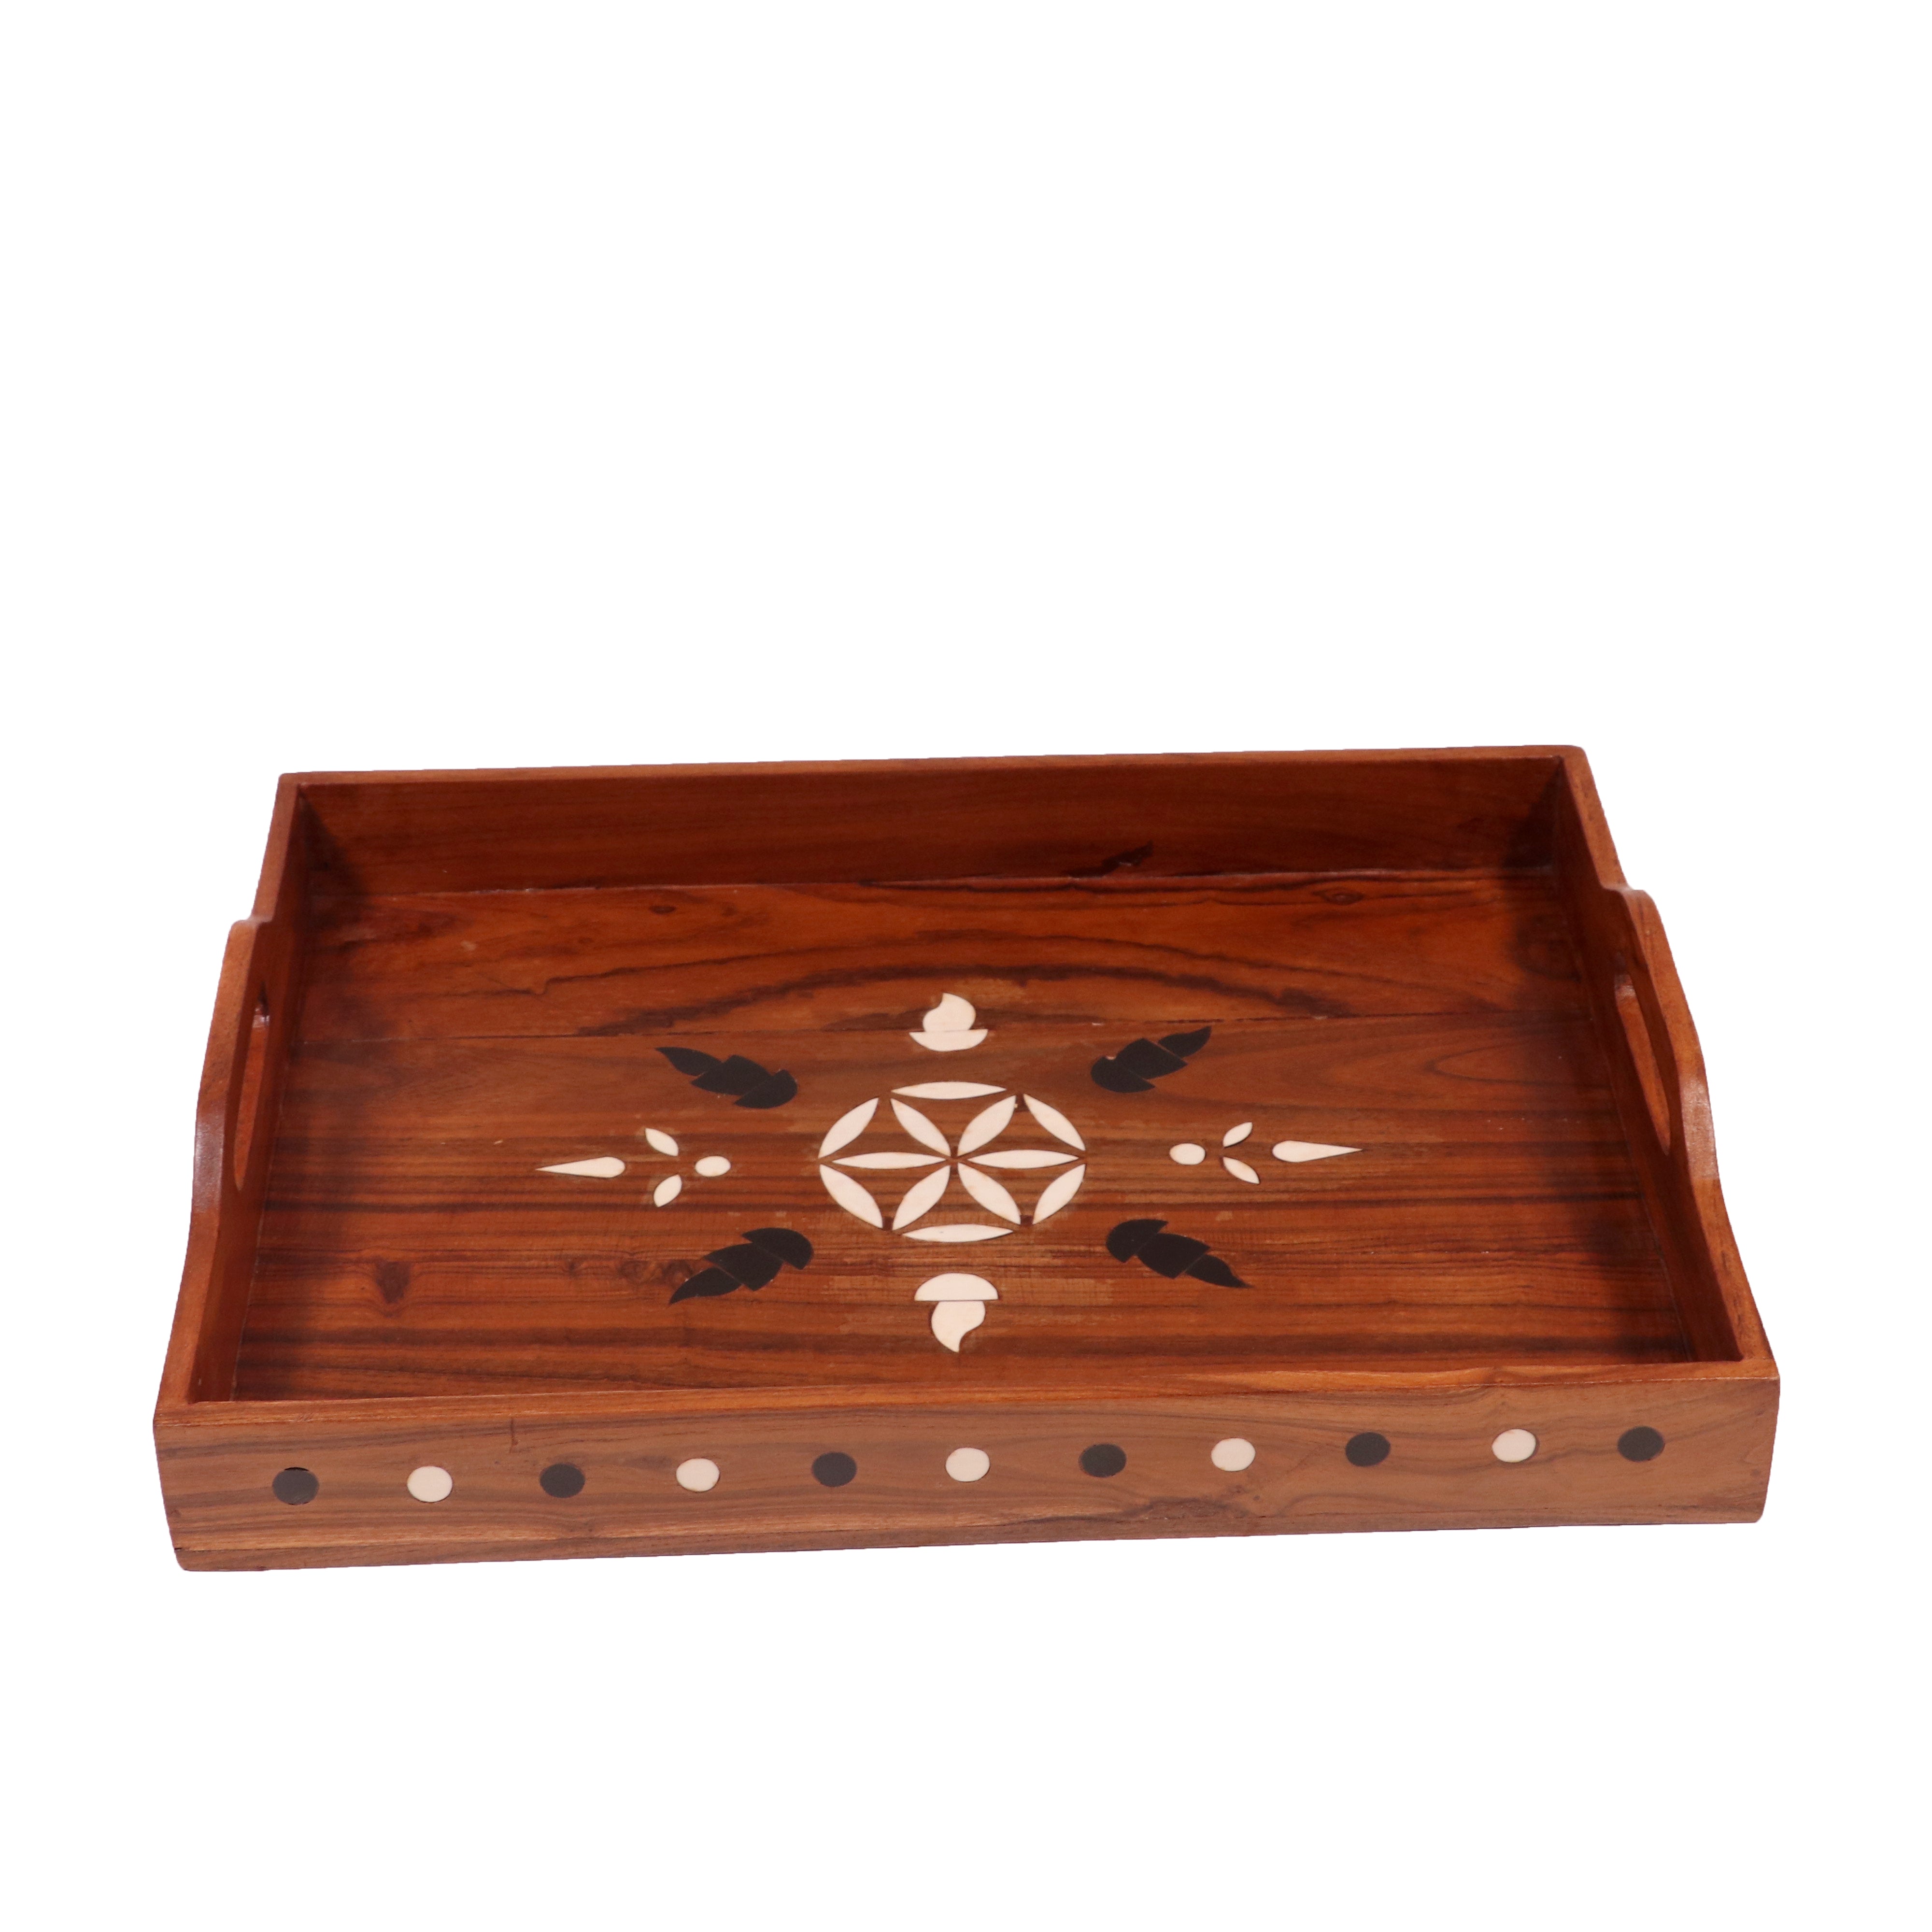 Fusion Flower Inlay Designed Wooden Handmade Tray - Set of 2 Tray